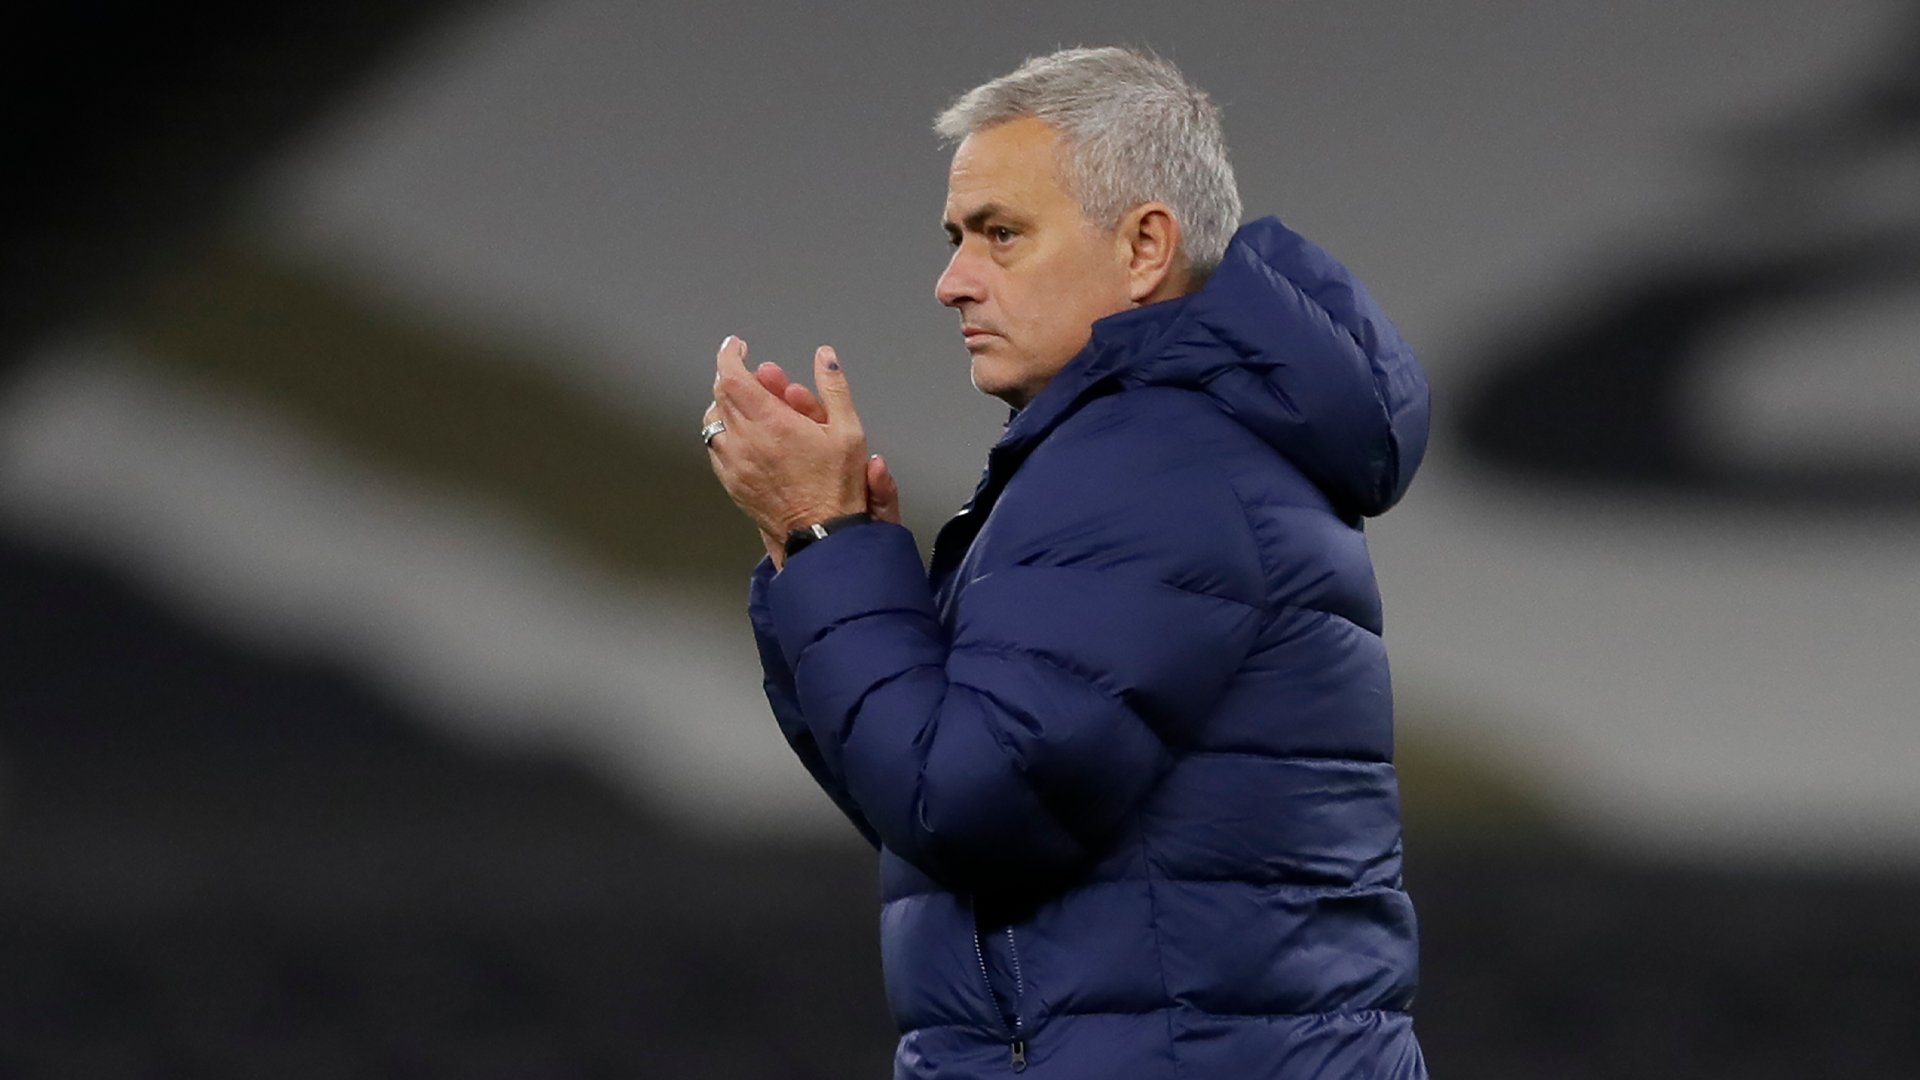 Finals are 50-50 but we will do out best to bring it to 51-49, reveals Jose Mourinho